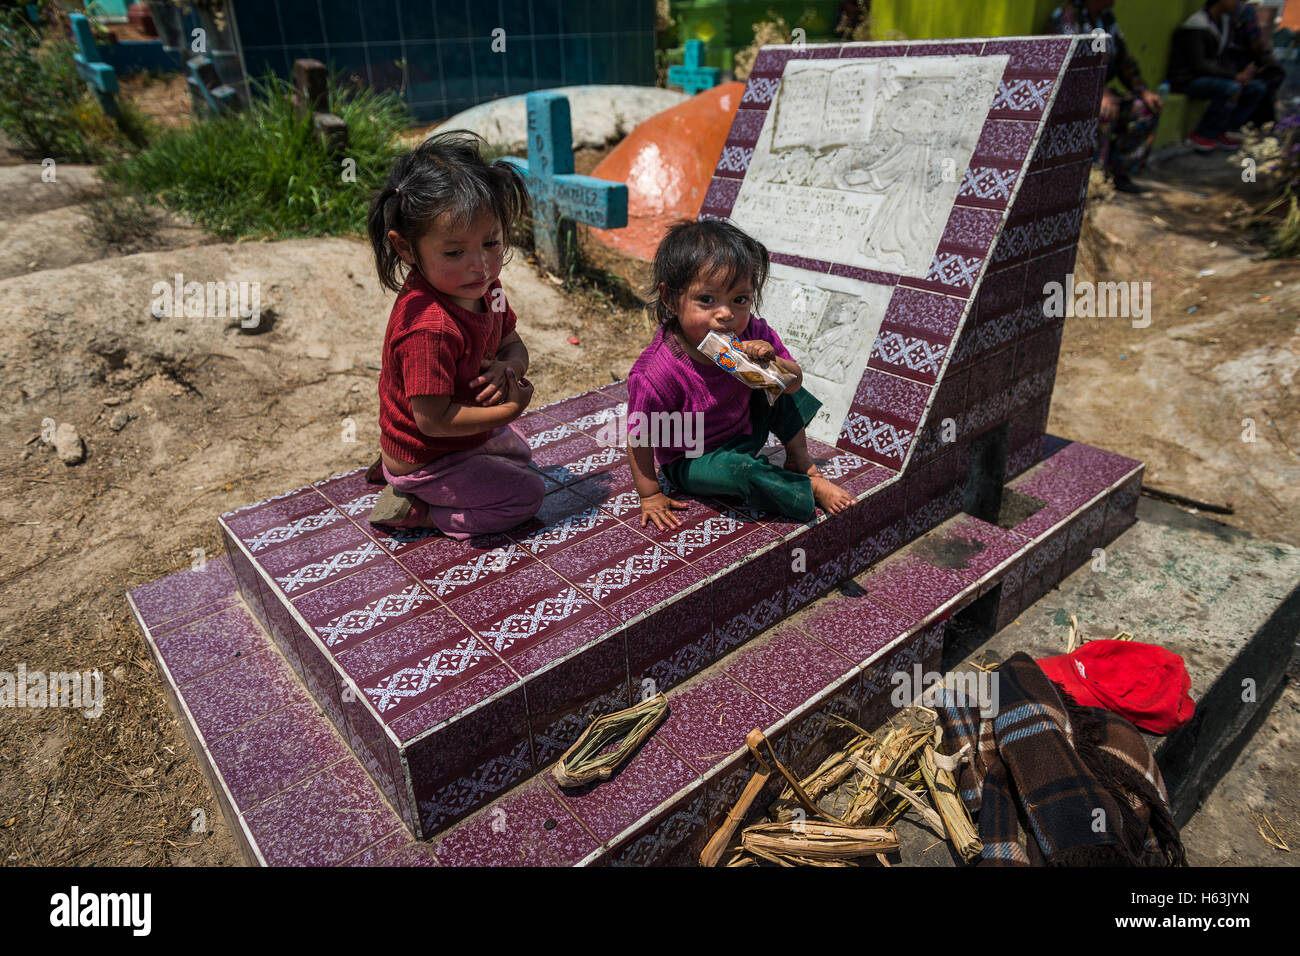 Chichicastenango, Guatemala - April 24, 2014: Children sitting in a grave in the cemetery of the town of Chichicastenango Stock Photo